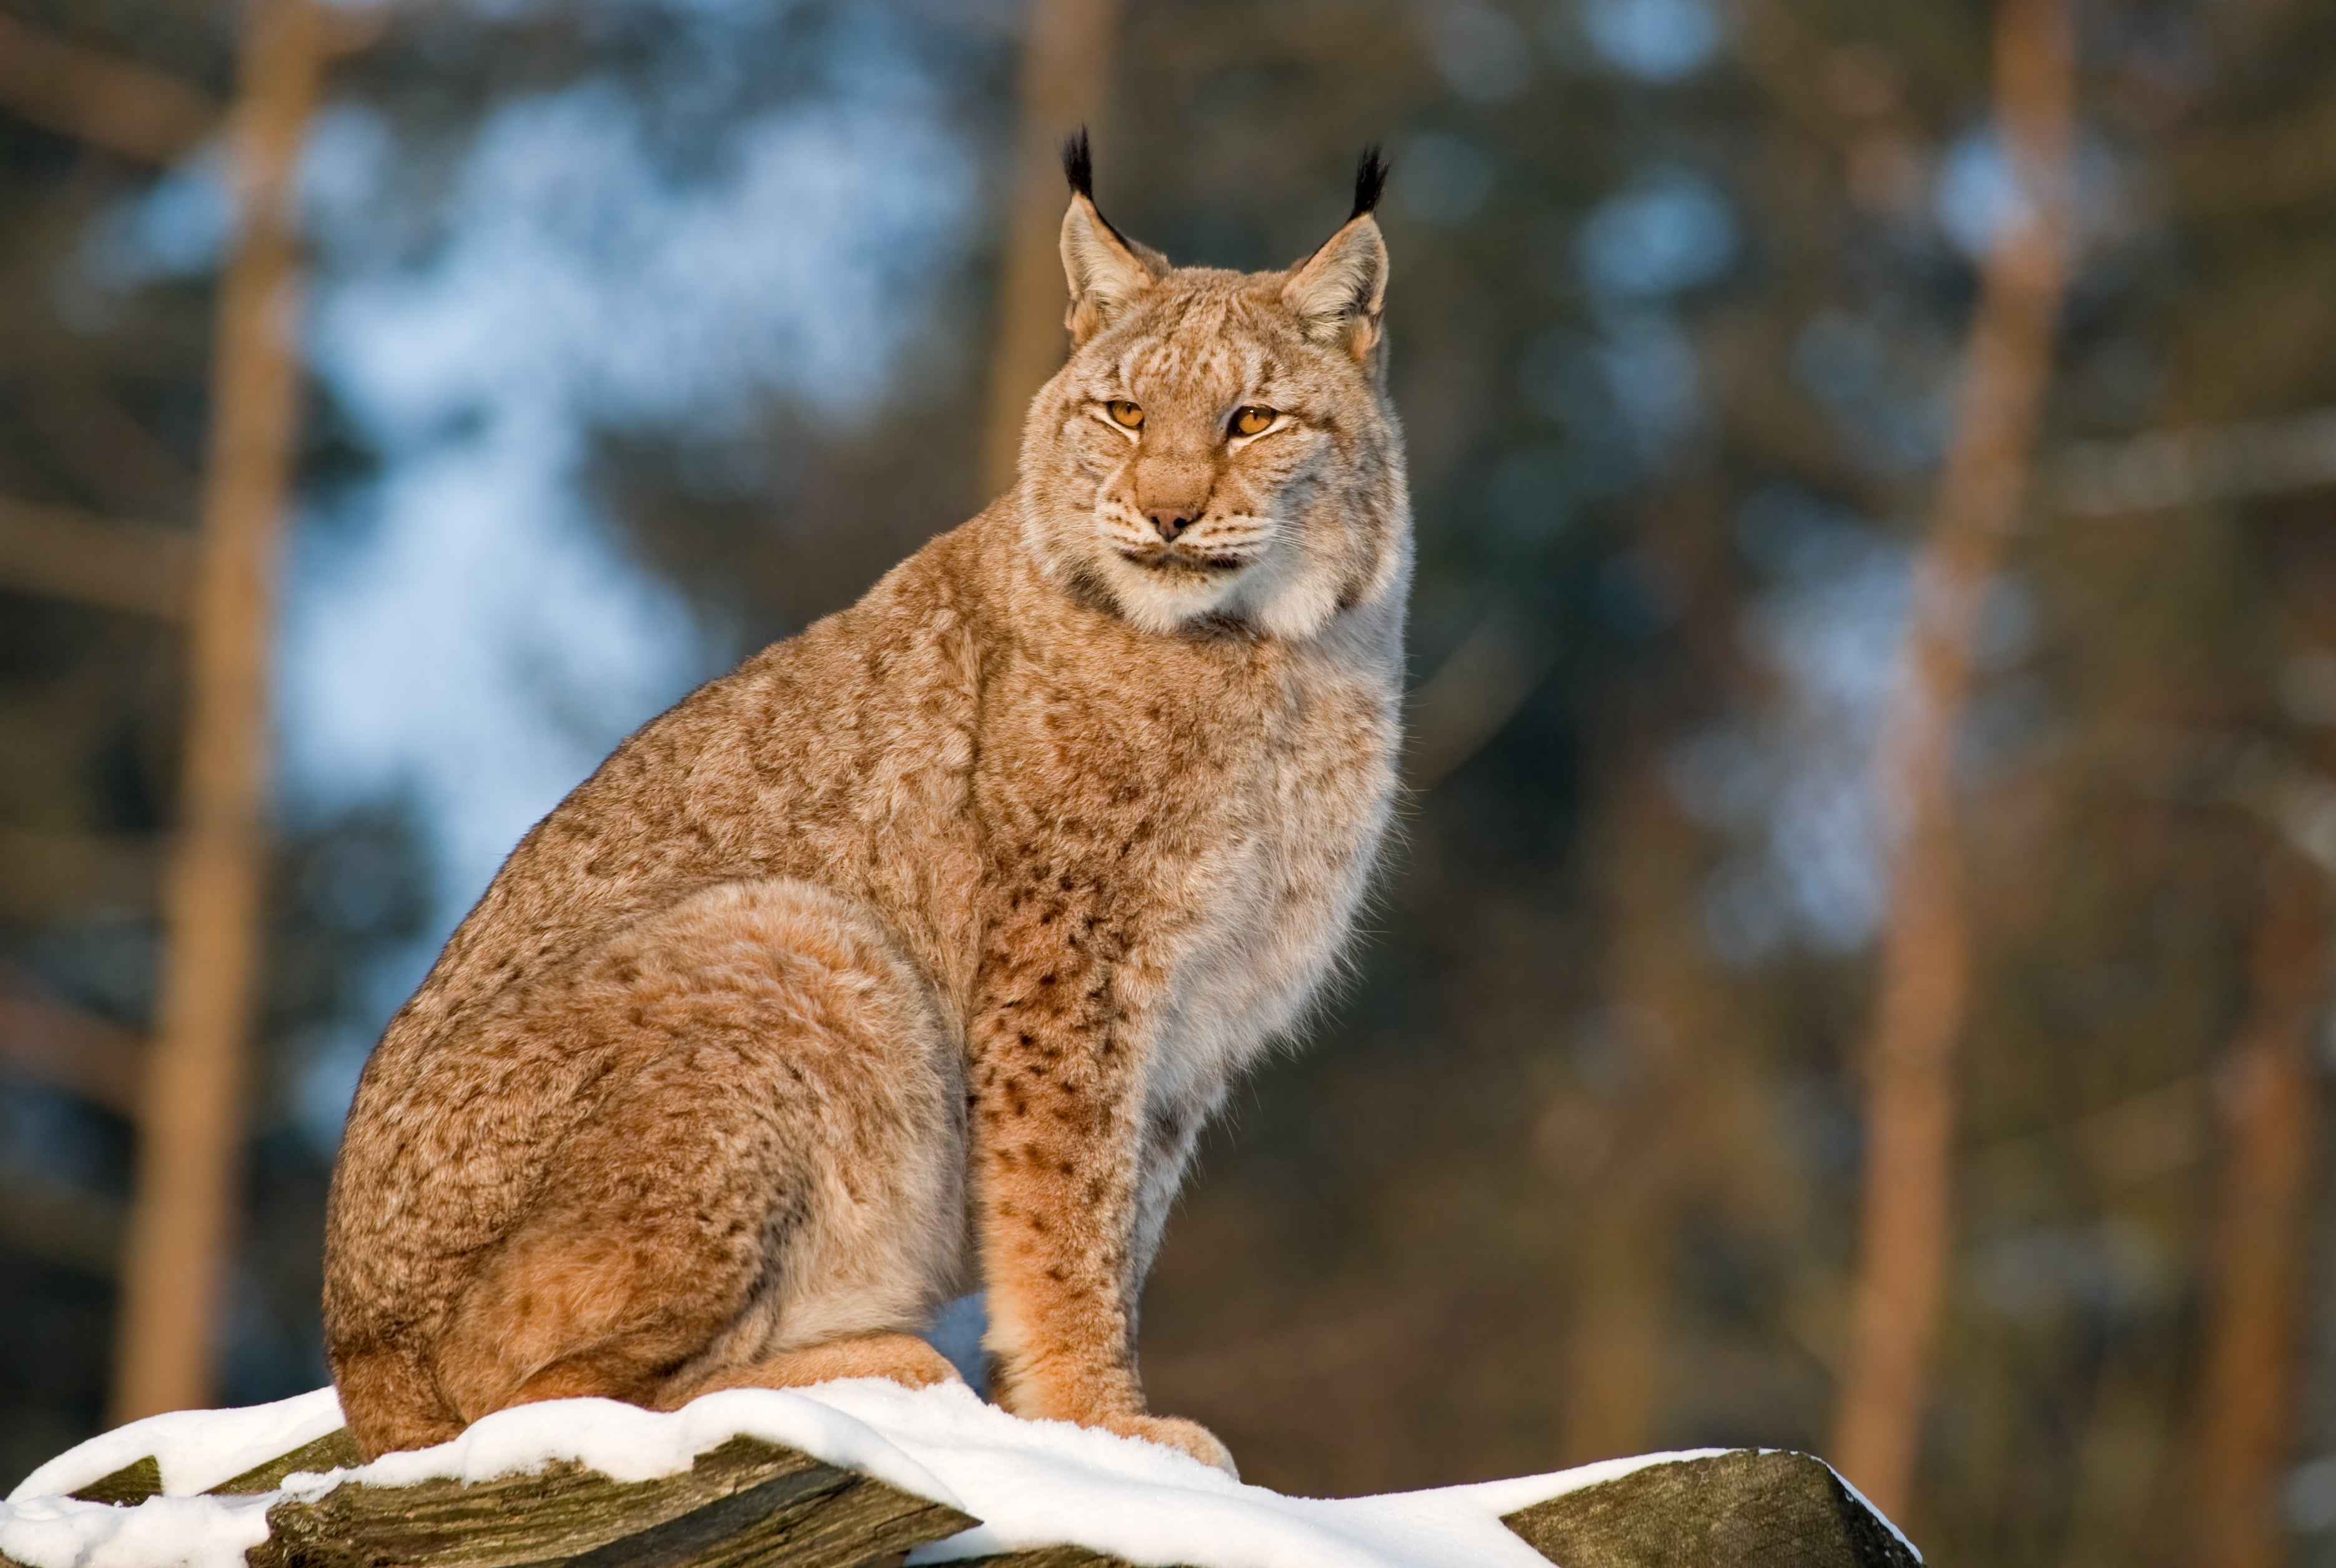 Lynx are notoriously shy and are rarely spotted by humans, even in areas where they live in relatively high numbers